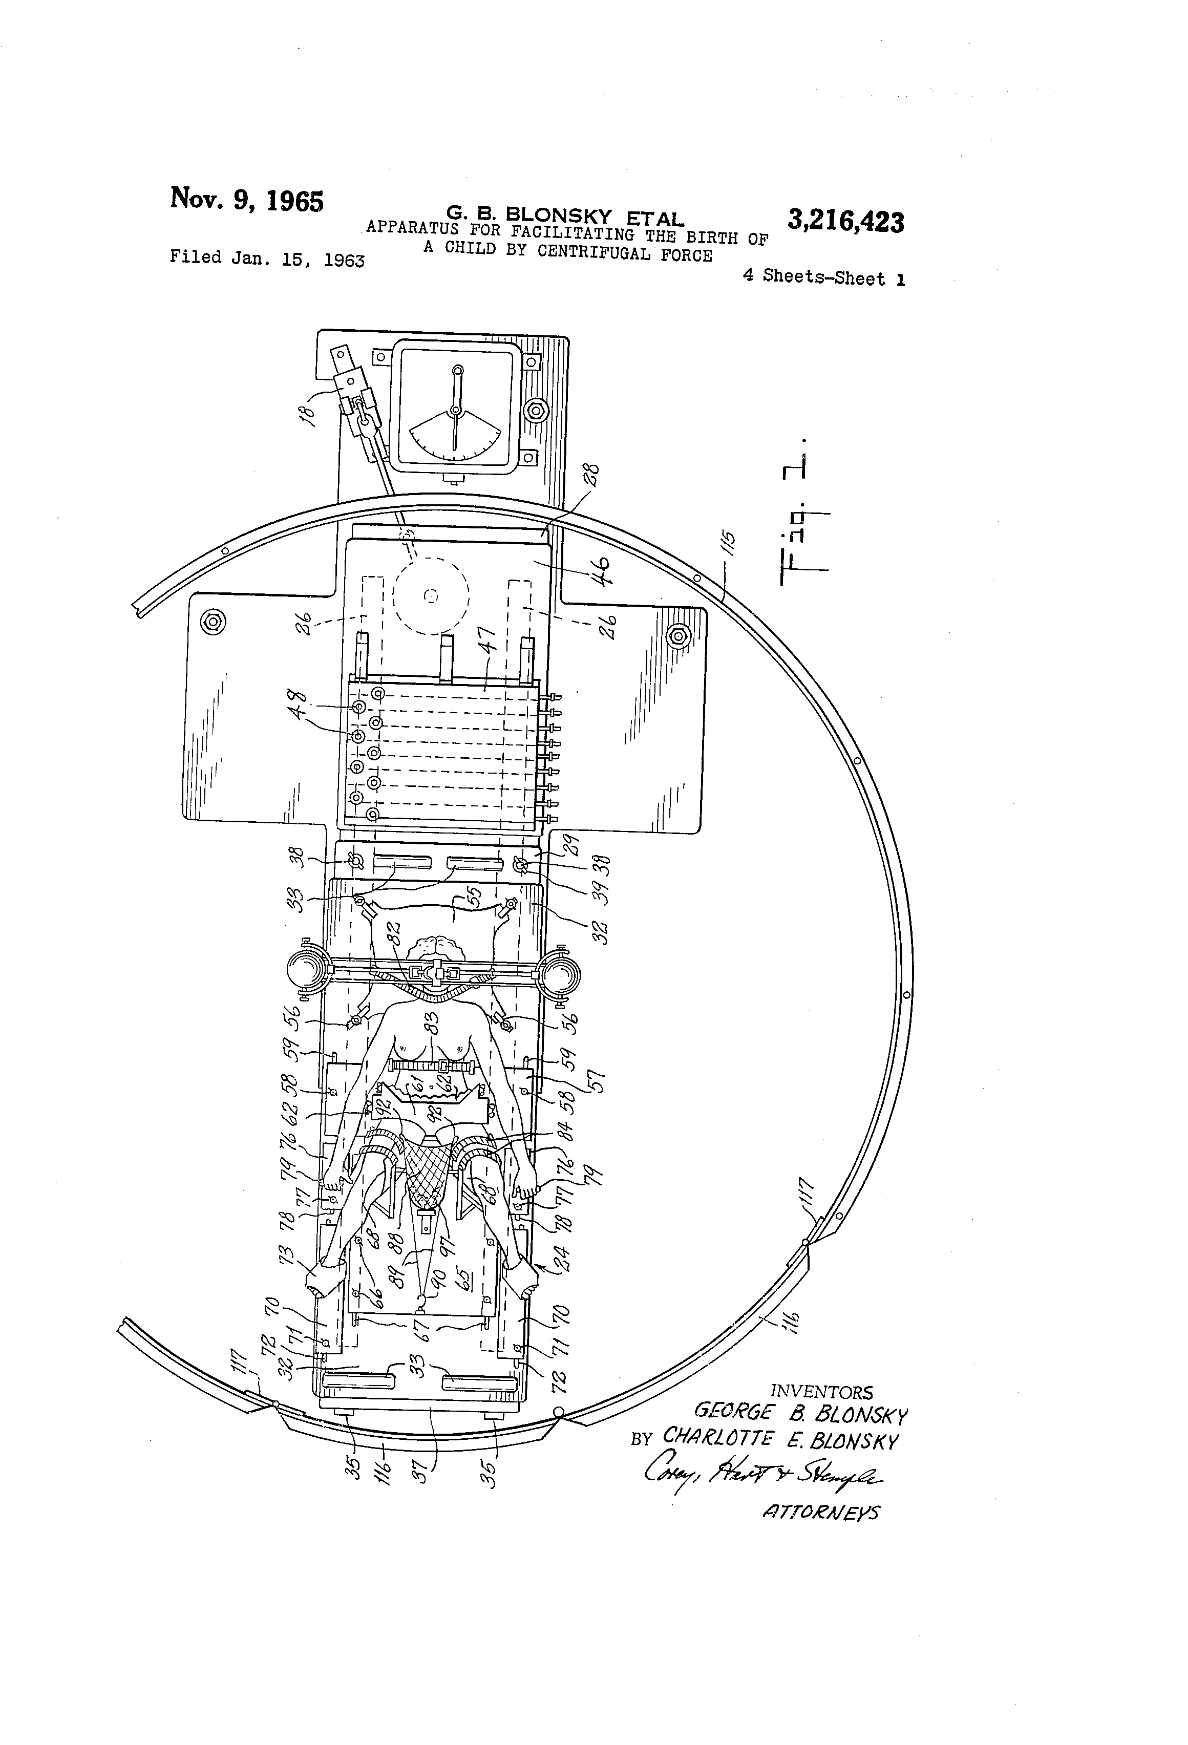 Patent from 1965 by G. B. Blonsky et al. It is a schematic for a centrifuge. A large circle encompasses a ballast and a stretcher with a person strapped flat to it. The person is strapped at the head, legs and feet with legs wide. A net is over the pelvis. There is a control deck.